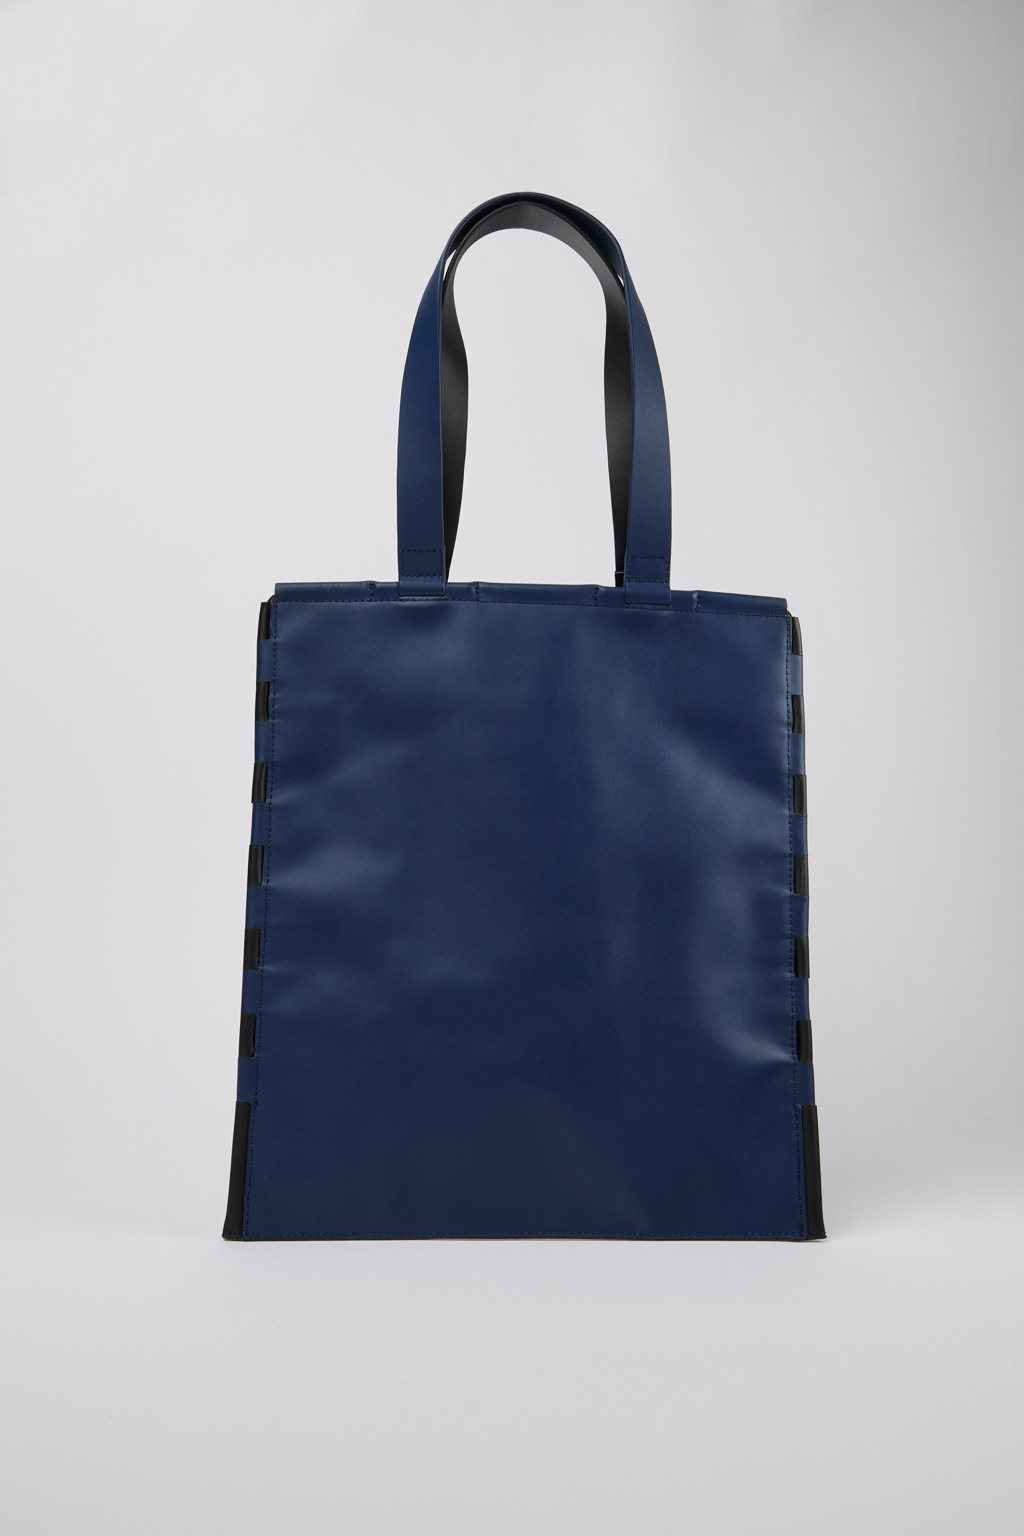 Blue Bags & Accessories for Unisex - Spring/Summer collection 